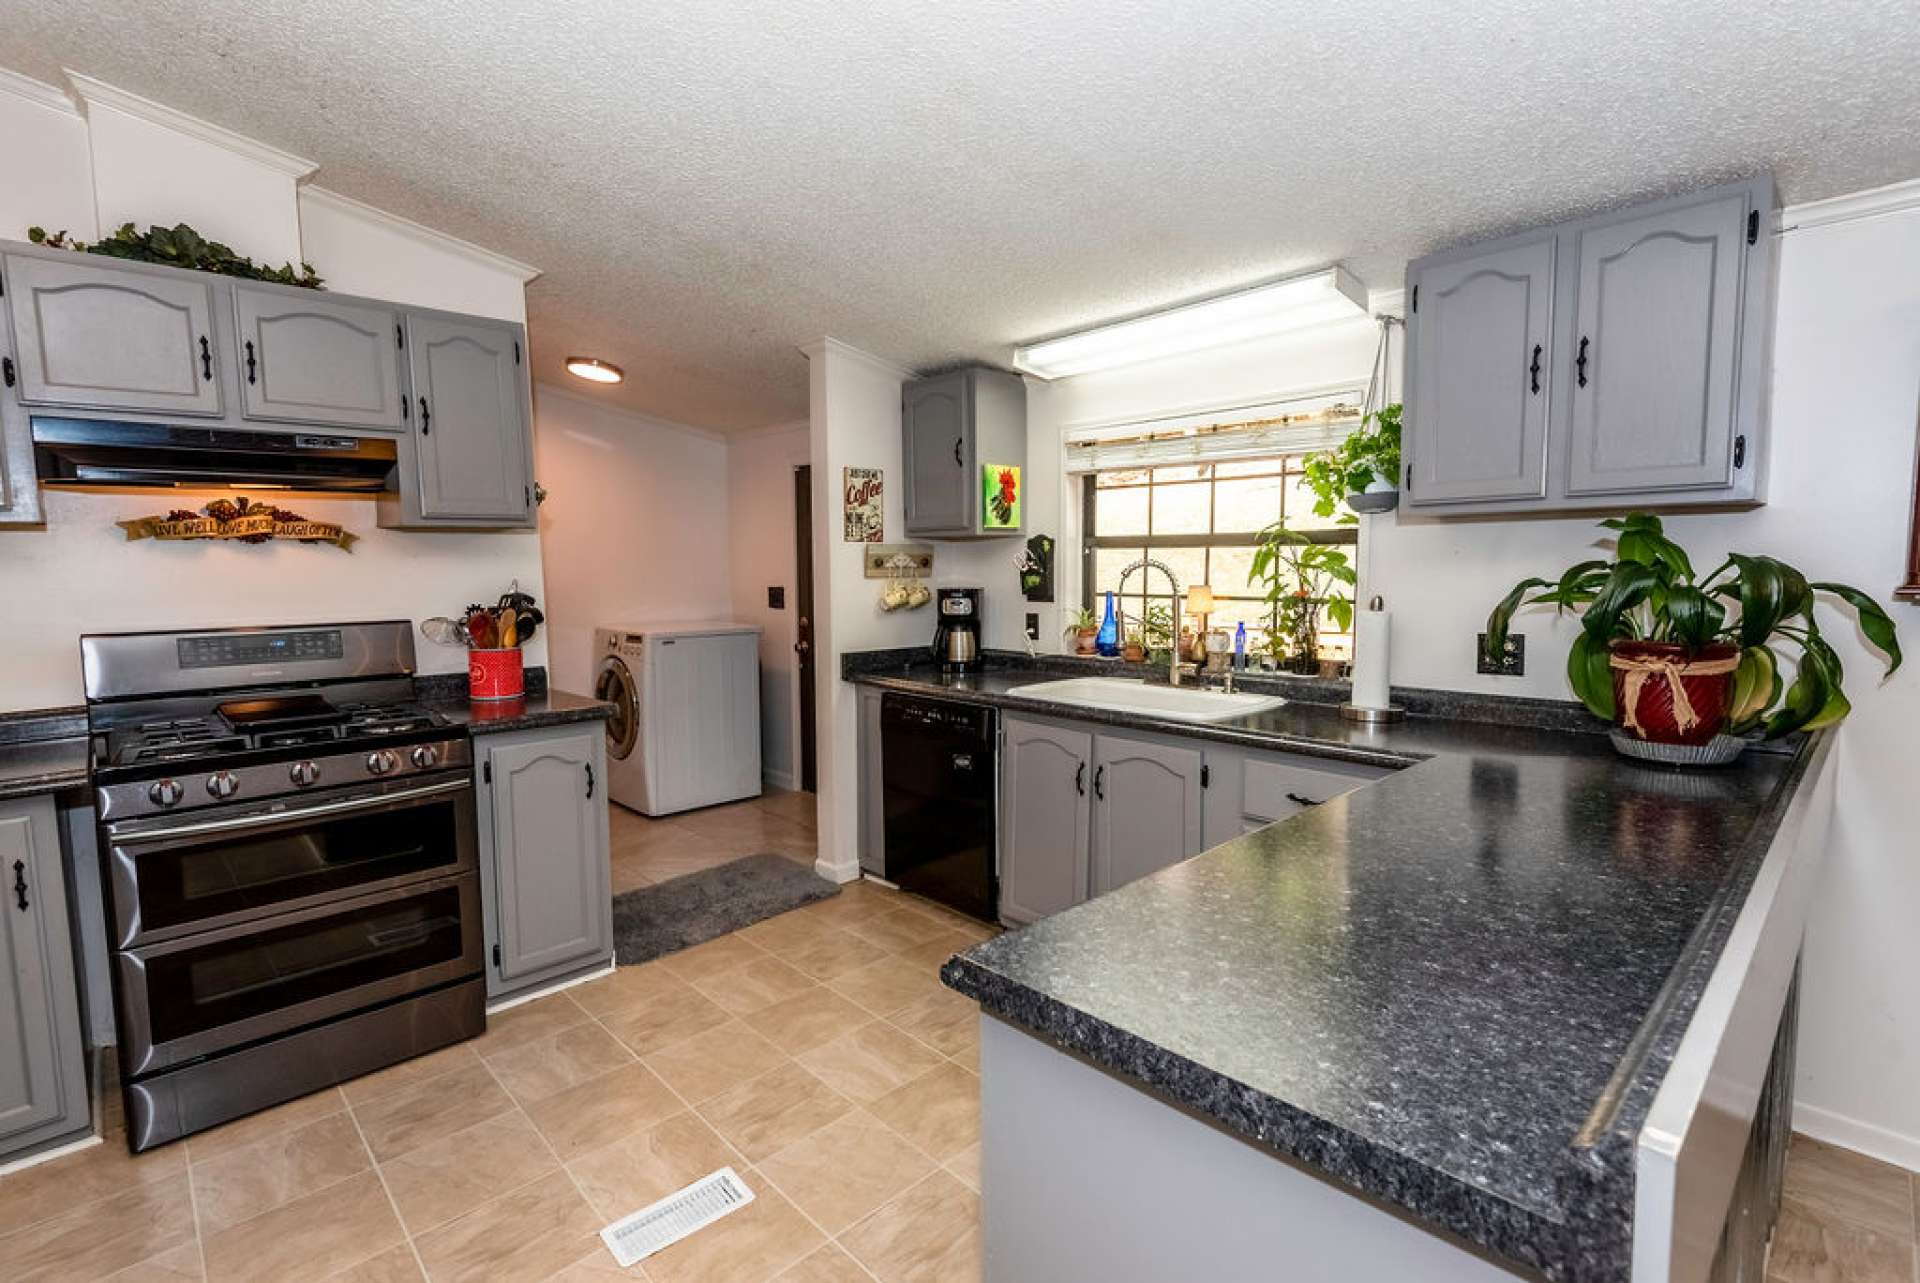 You will love the updated kitchen with gas range, new refrigerator, and new farm sink.